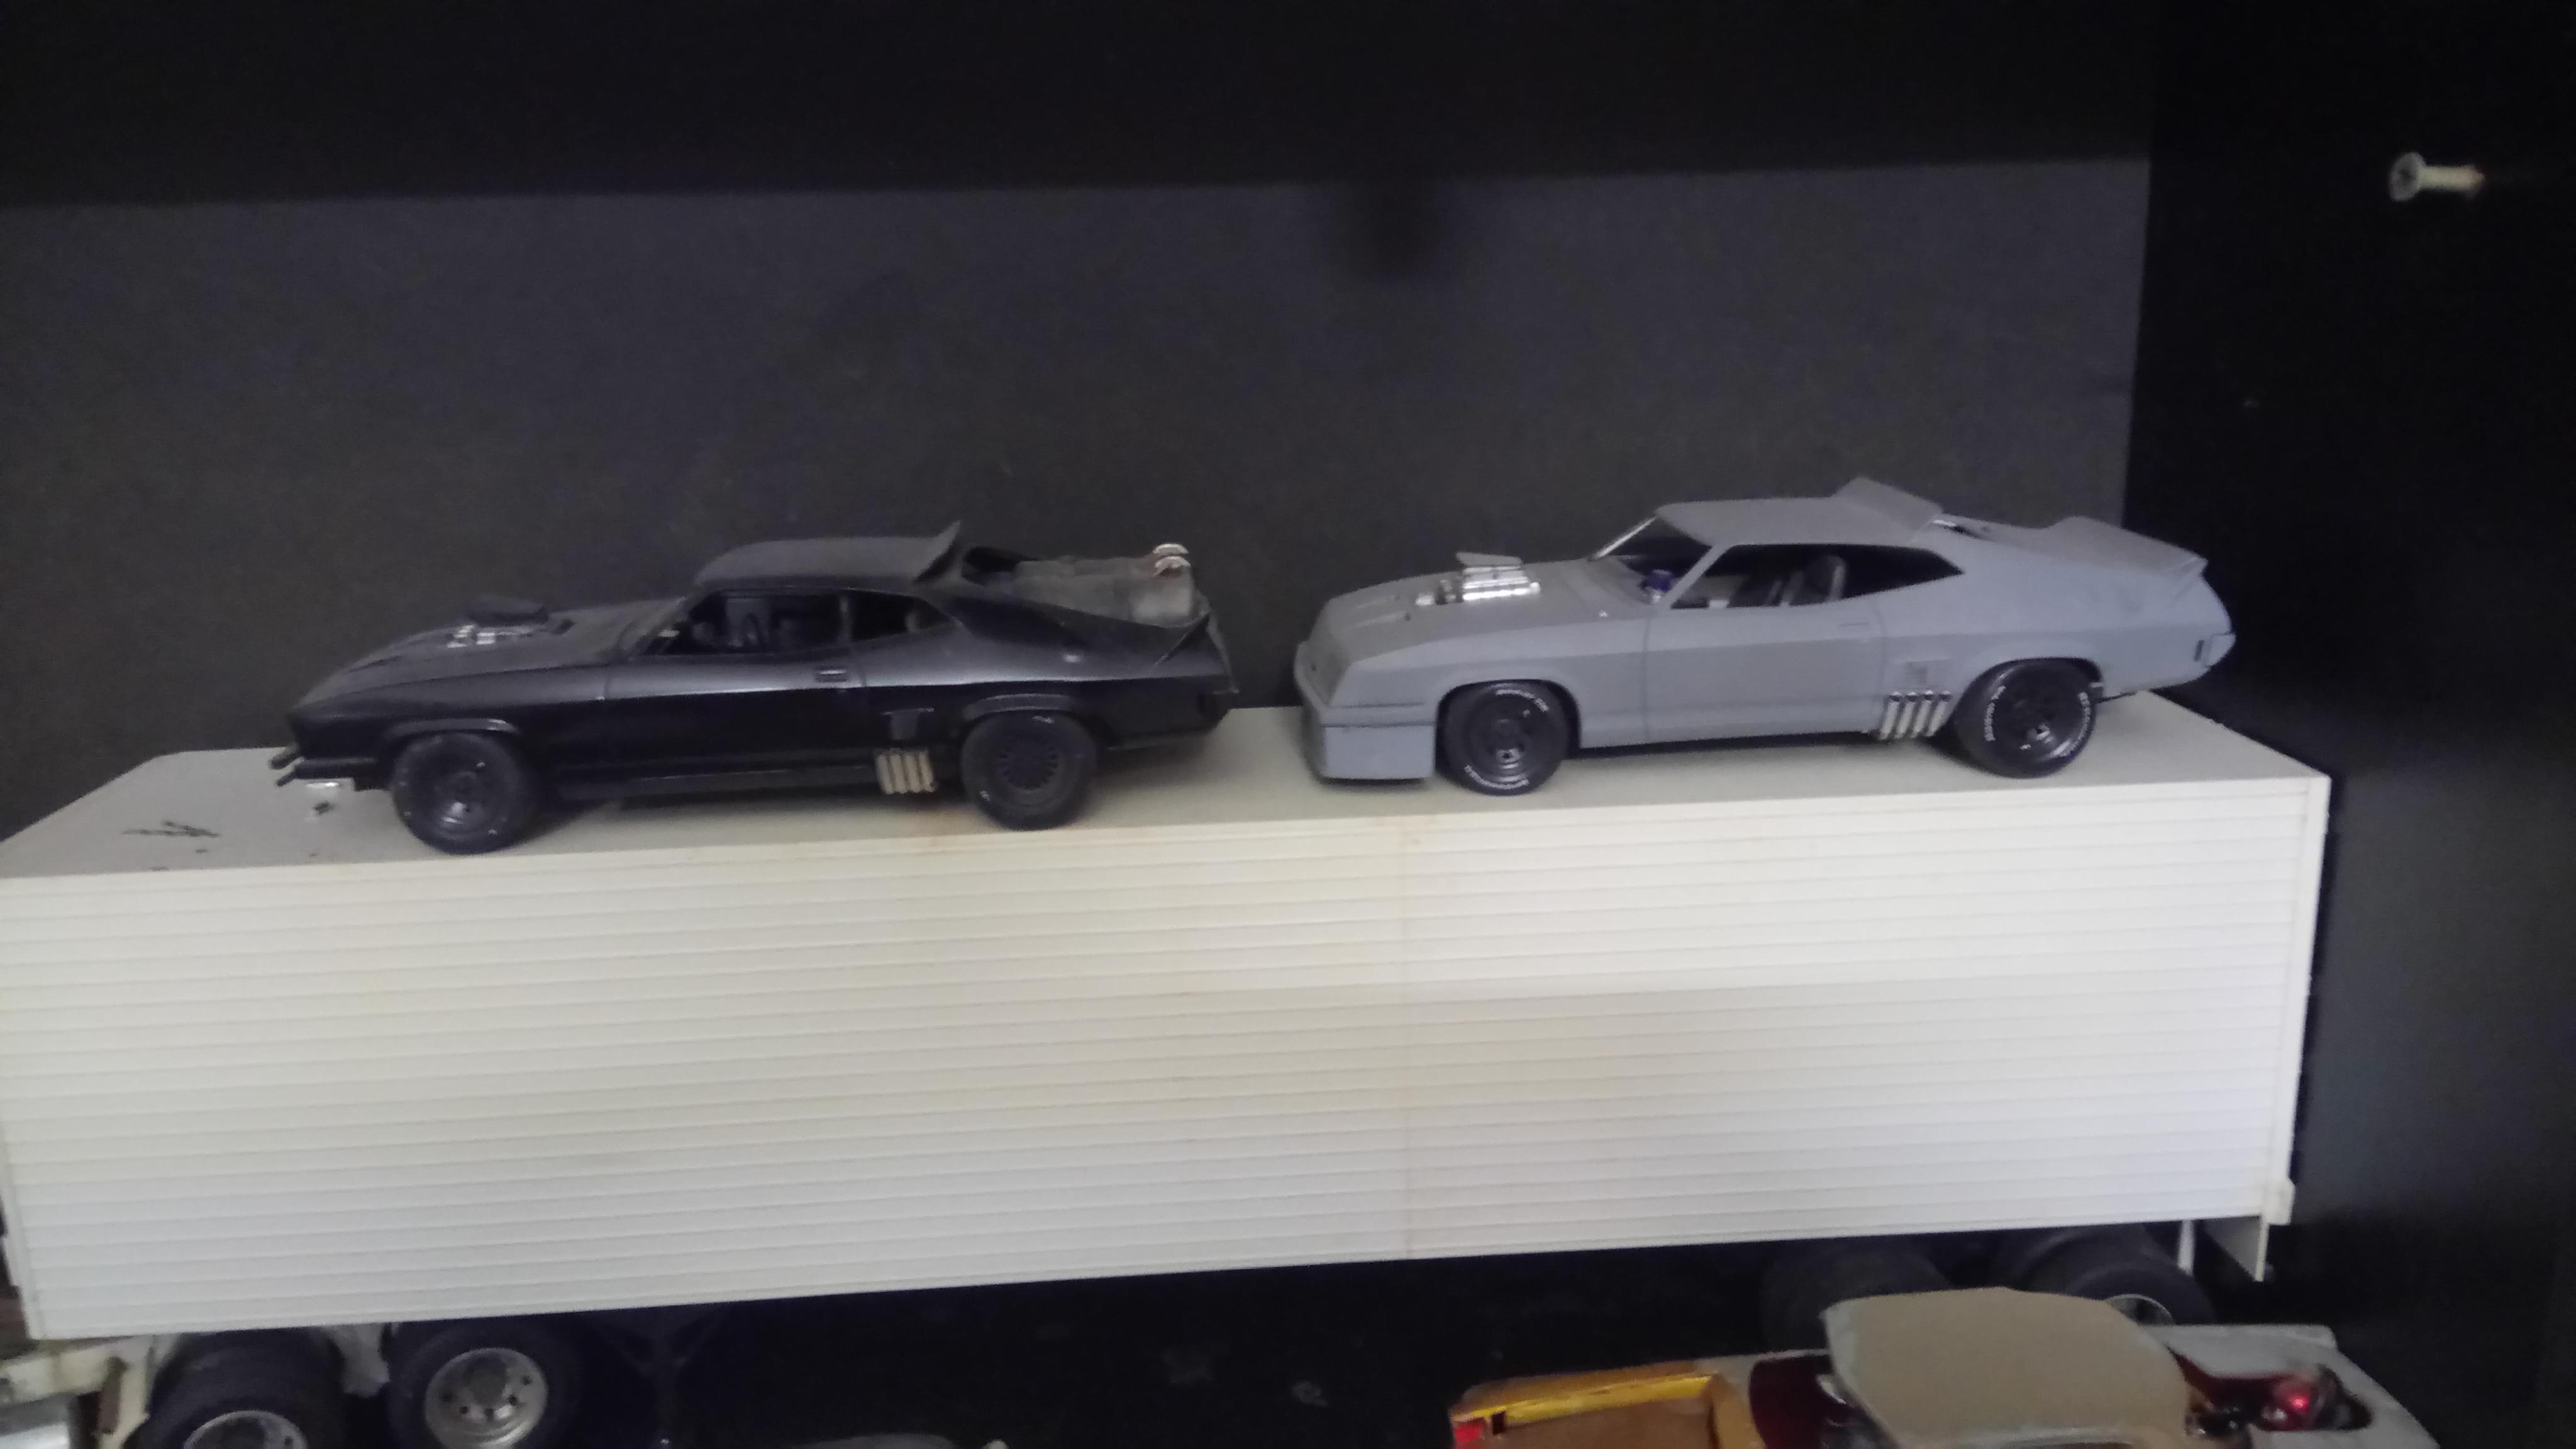 Mad Max - Car Aftermarket / Resin / 3D Printed - Model Cars Magazine Forum